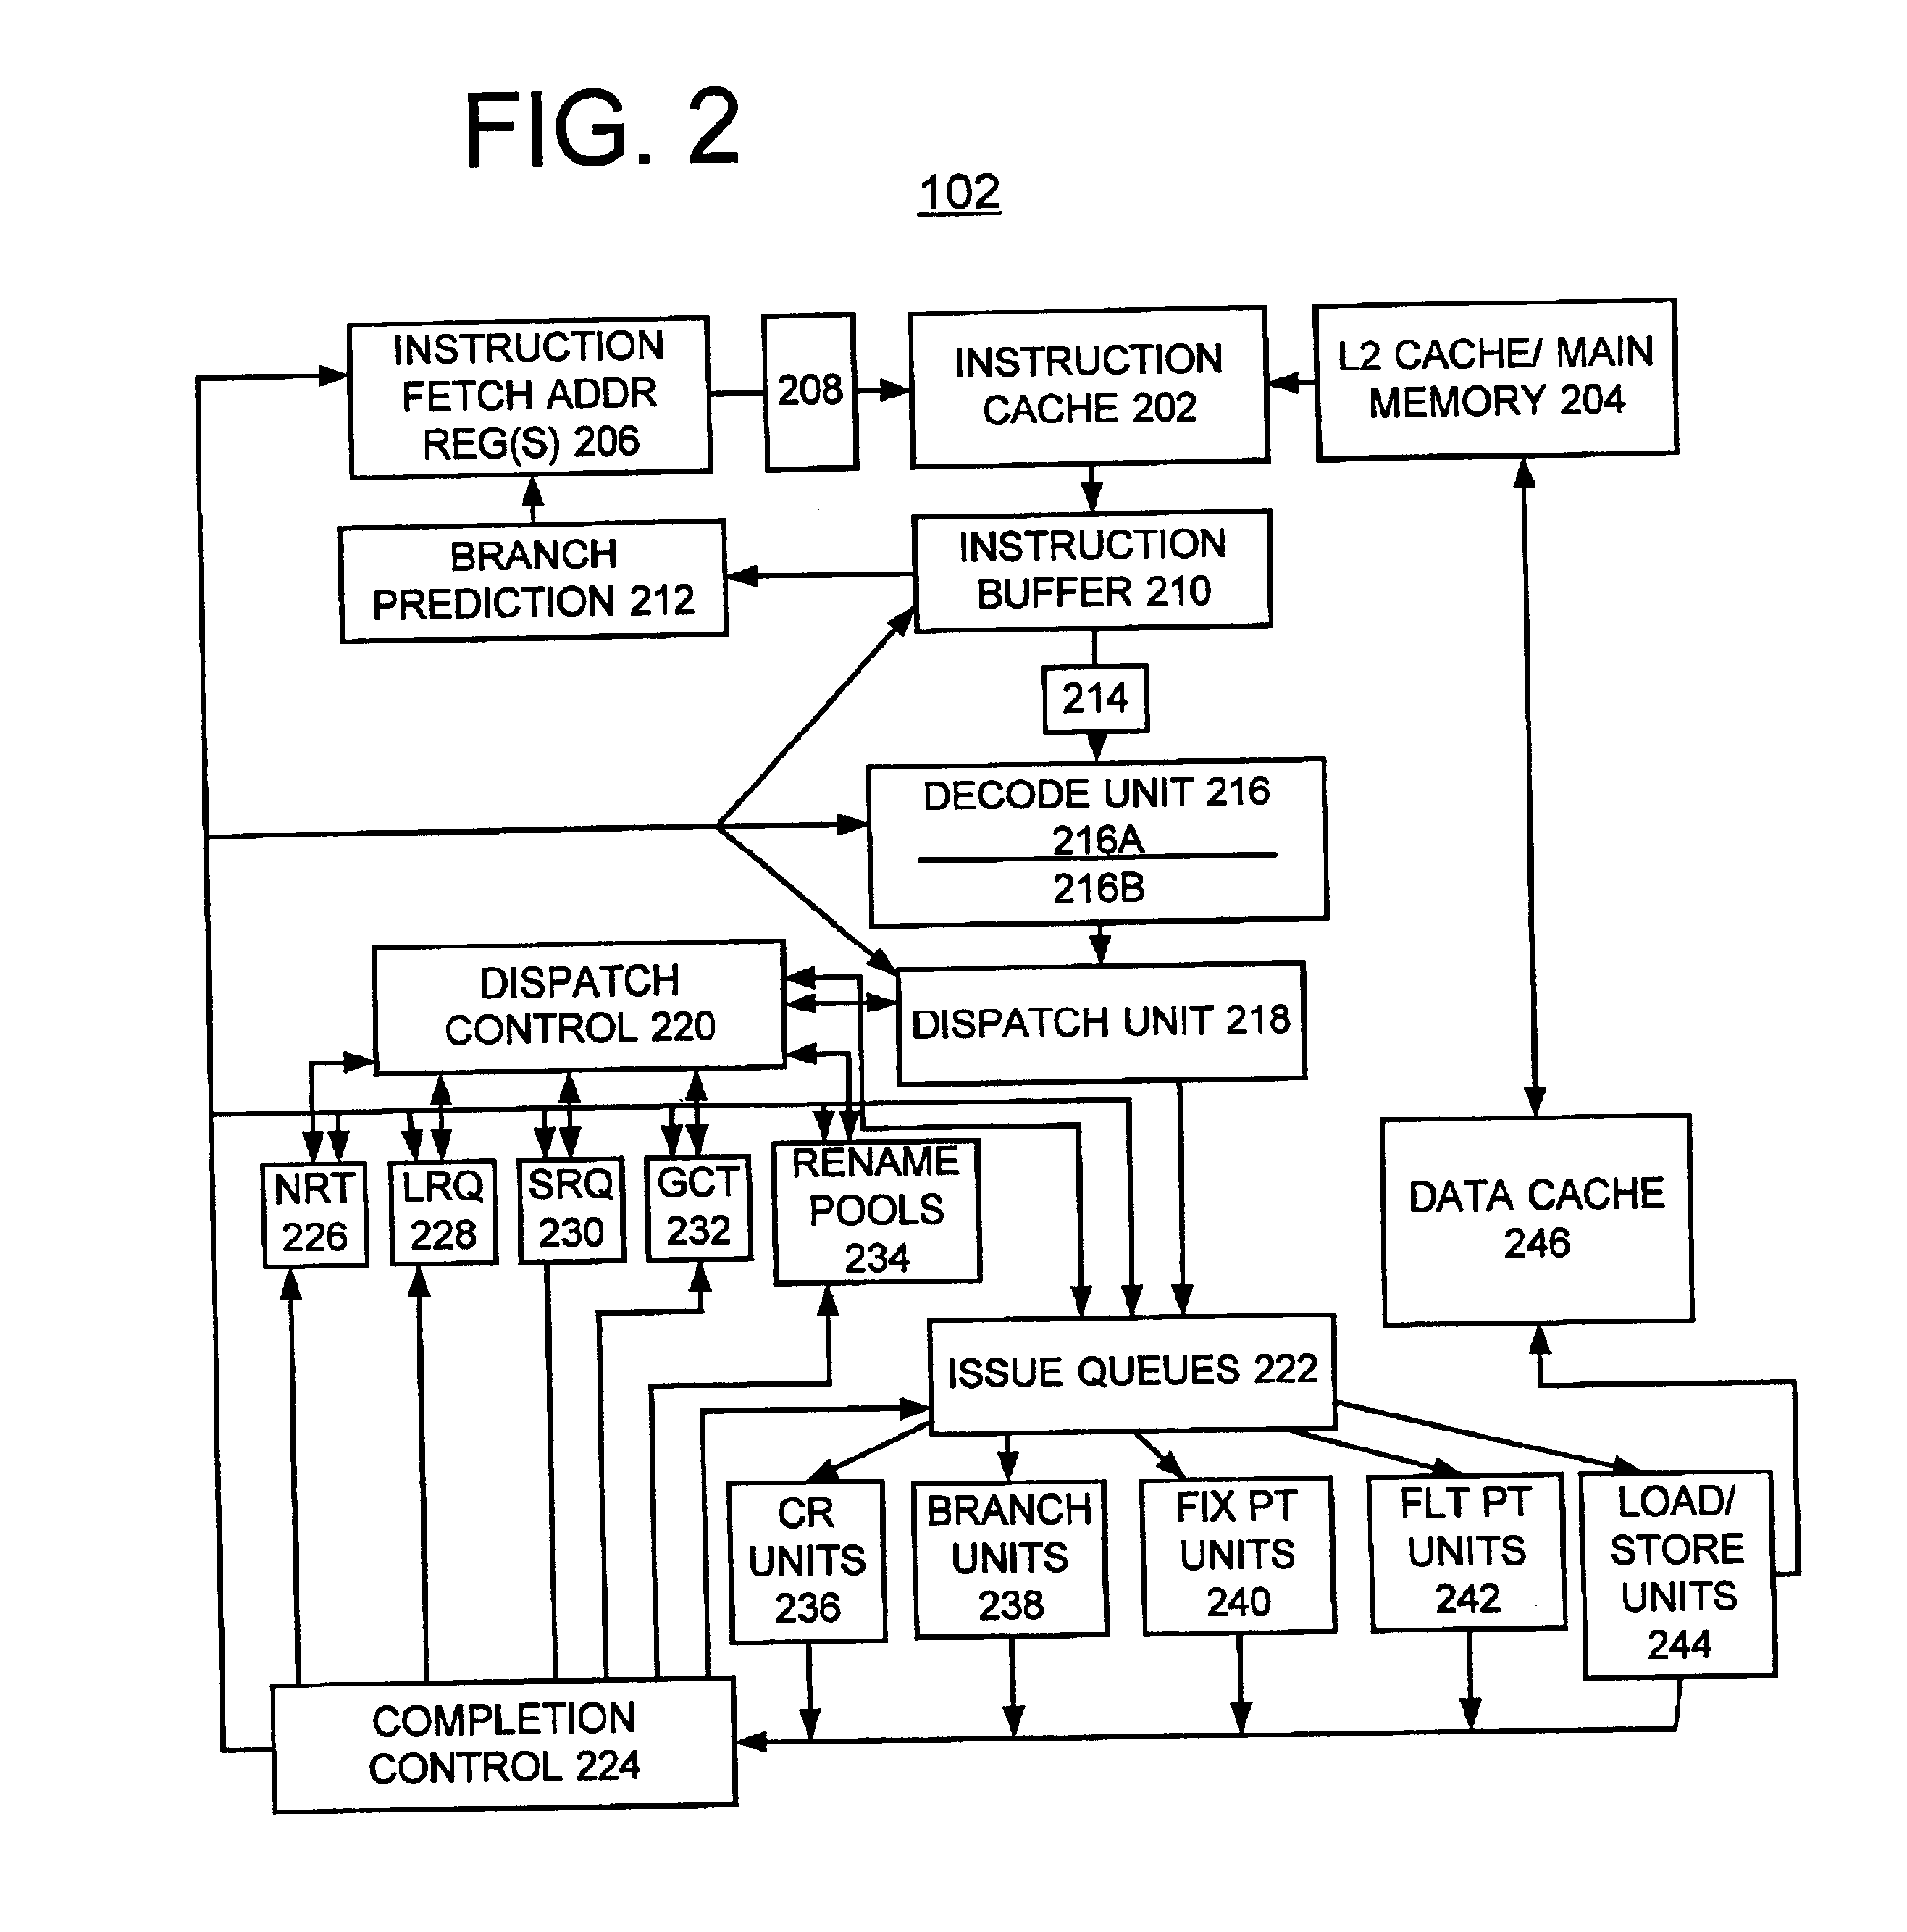 Method for implementing a variable-partitioned queue for simultaneous multithreaded processors